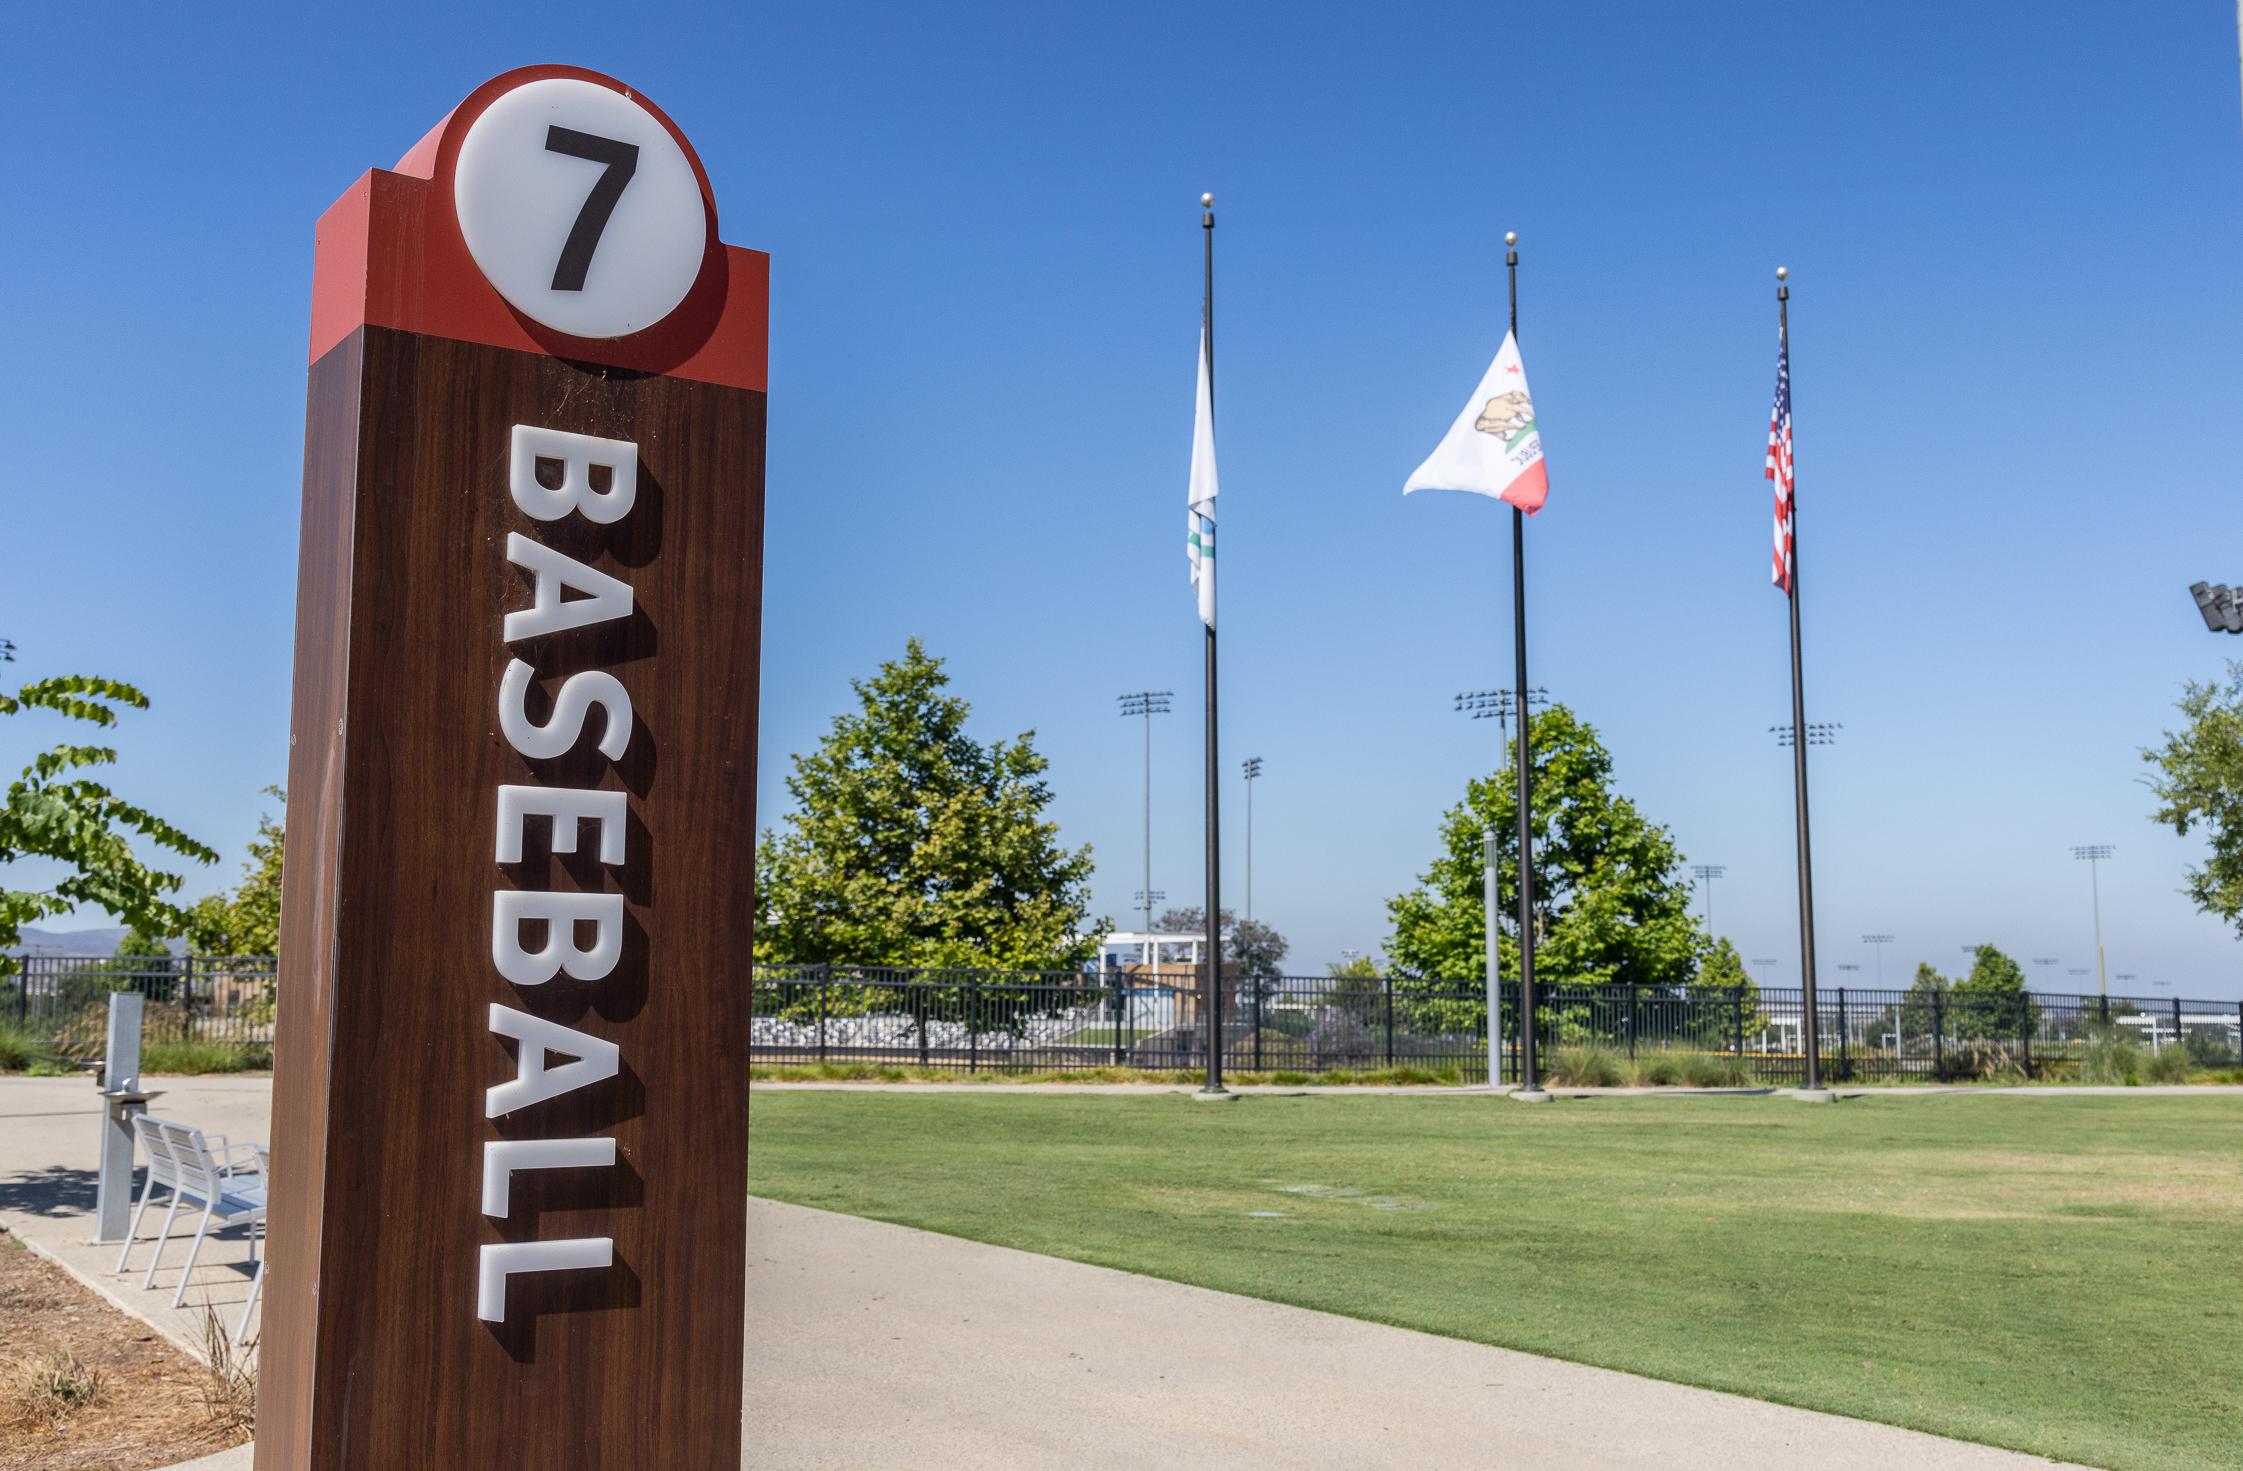 Bulk of USC’s Home Baseball Schedule Set for Great Park in Irvine